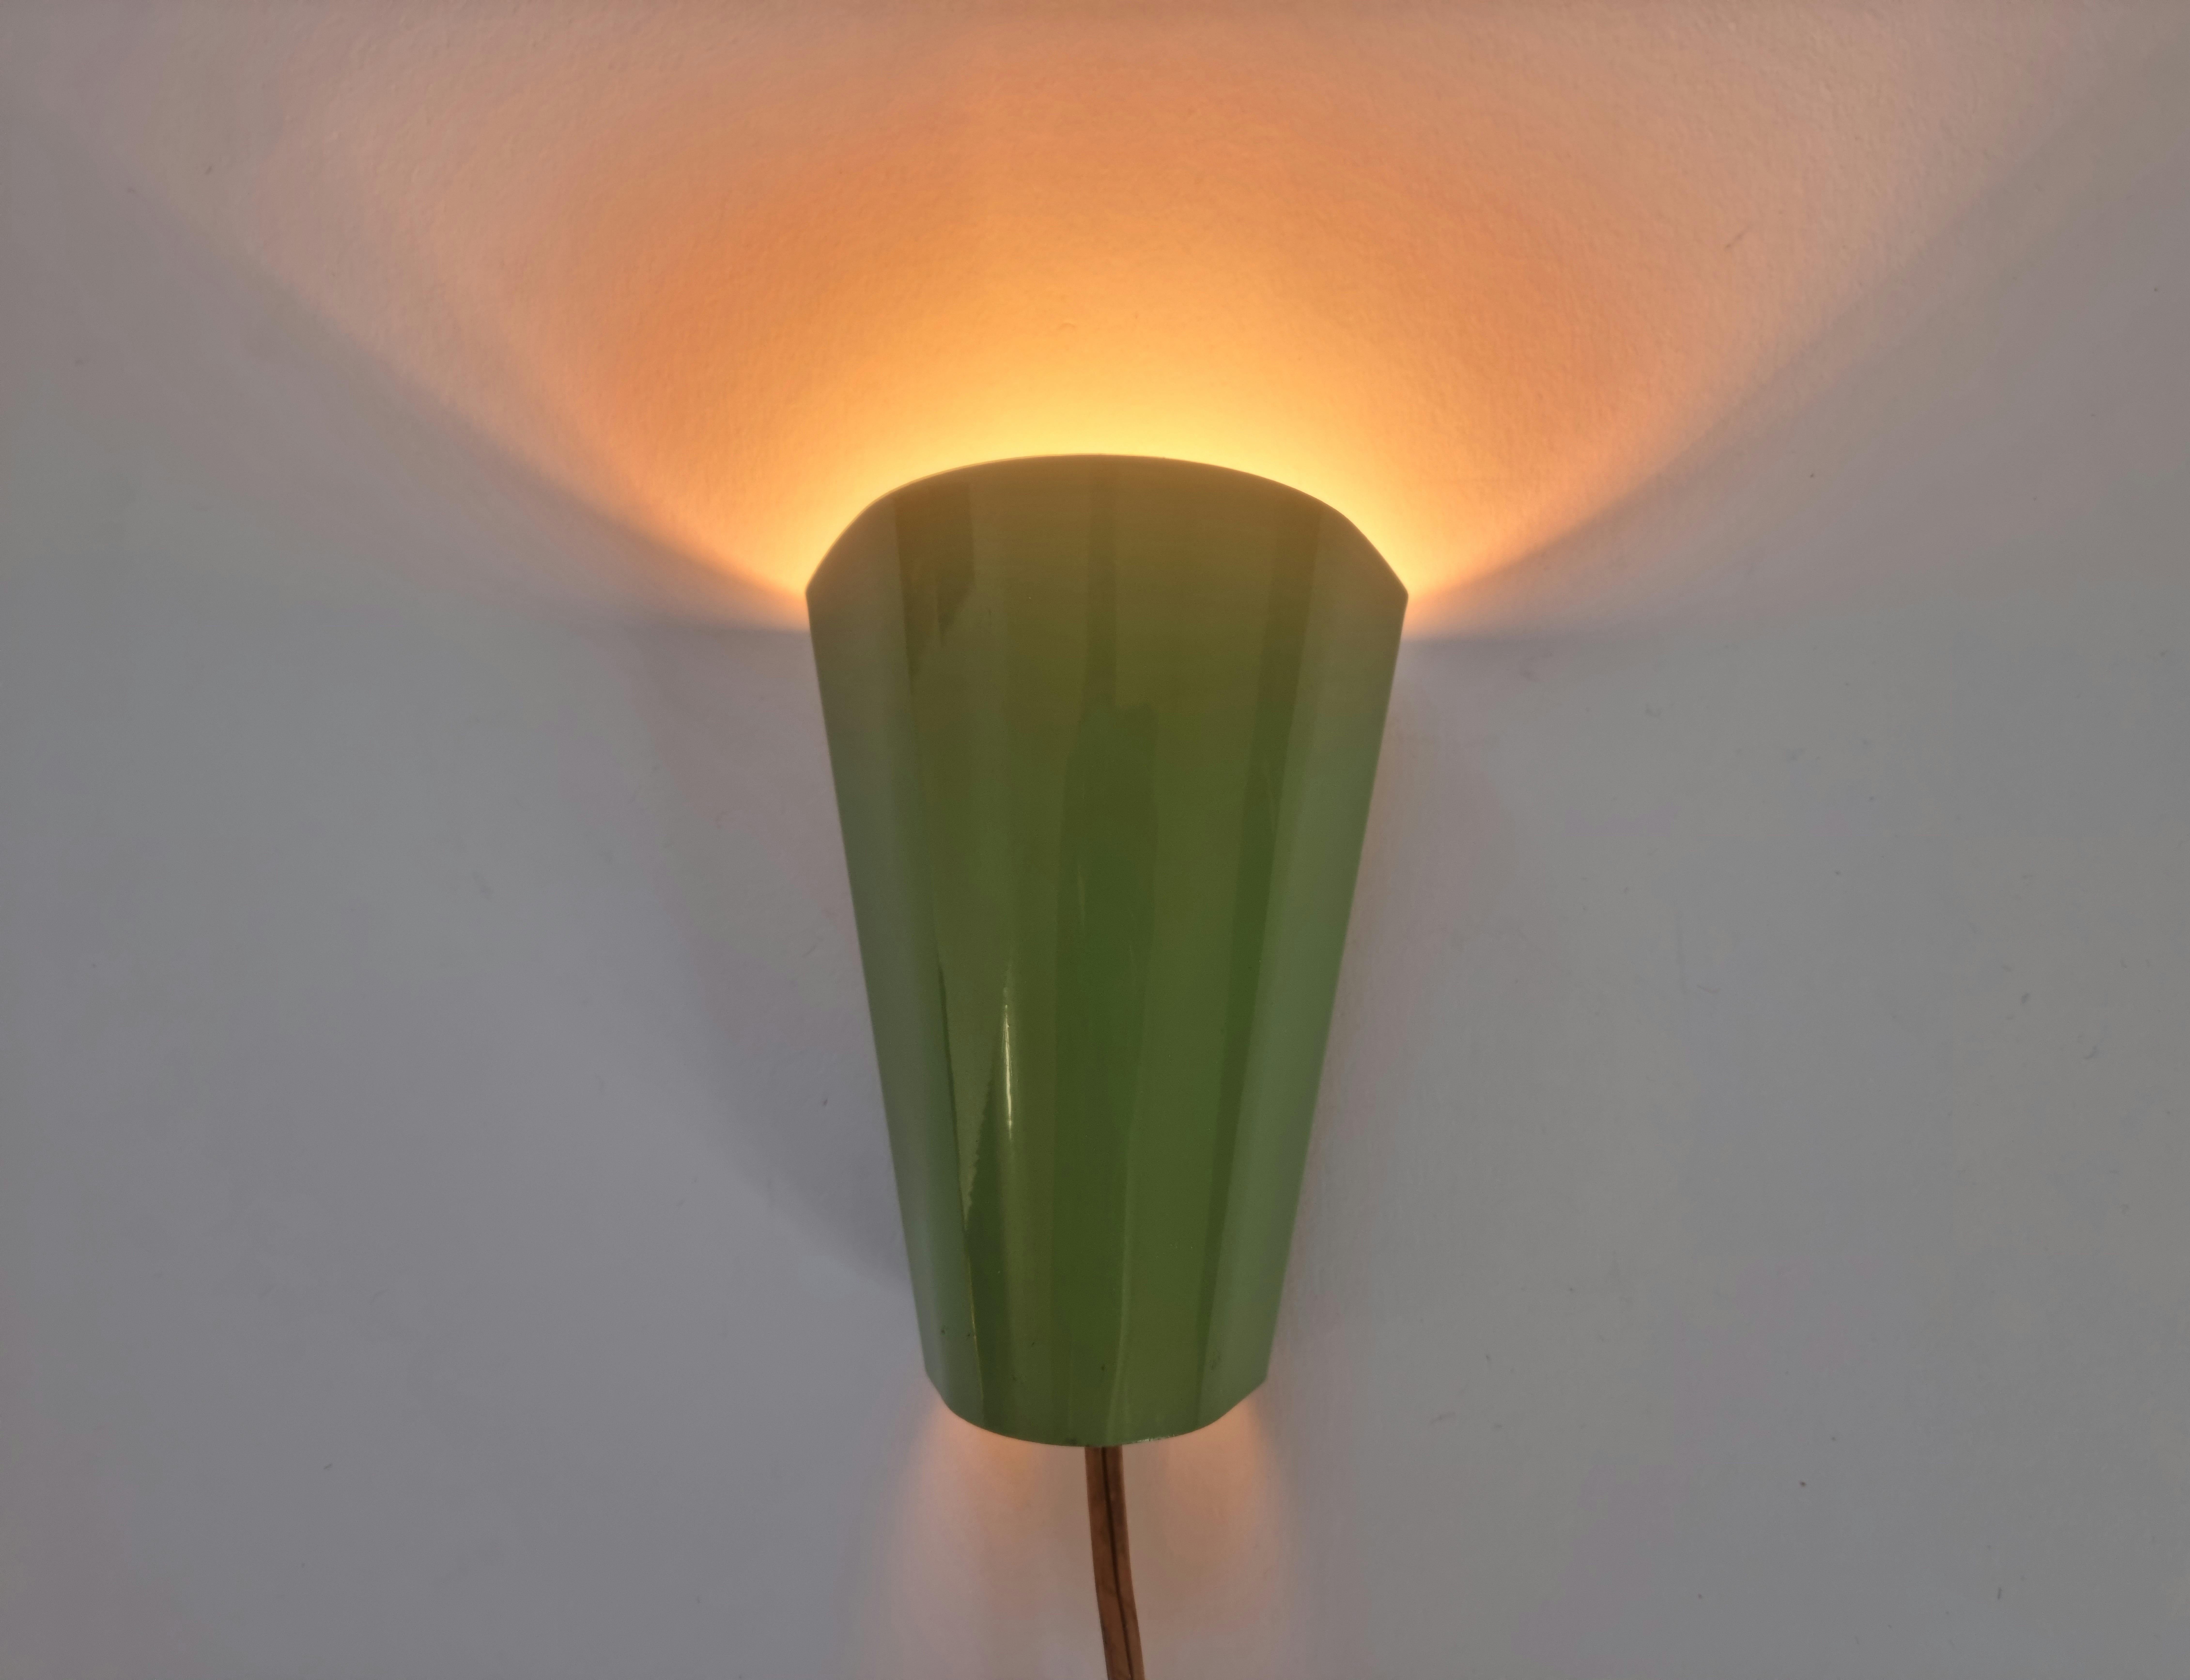 Midcentury Rare Wall Lamp Lidokov, Designed by Josef Hurka, 1960s For Sale 5